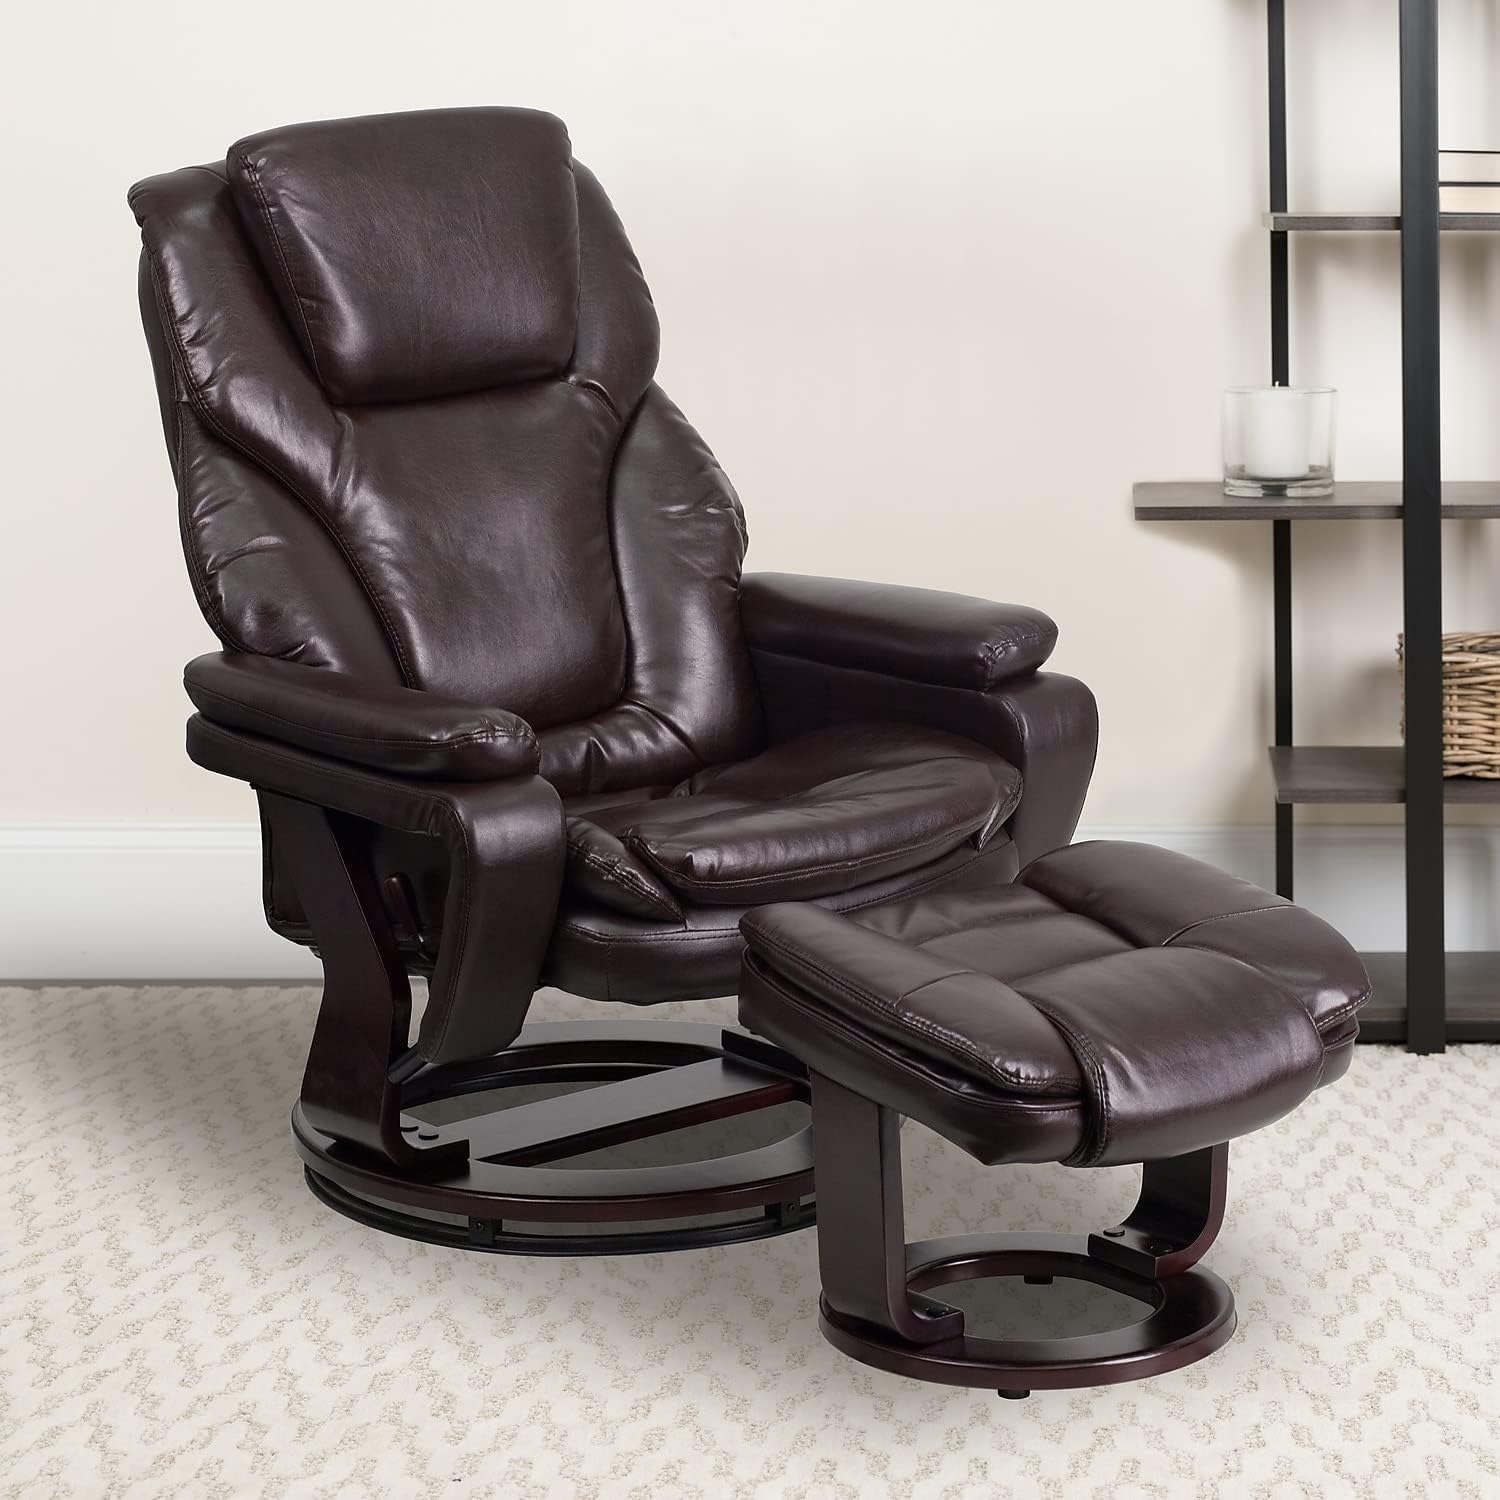 Lift Recliners with Swivel Base